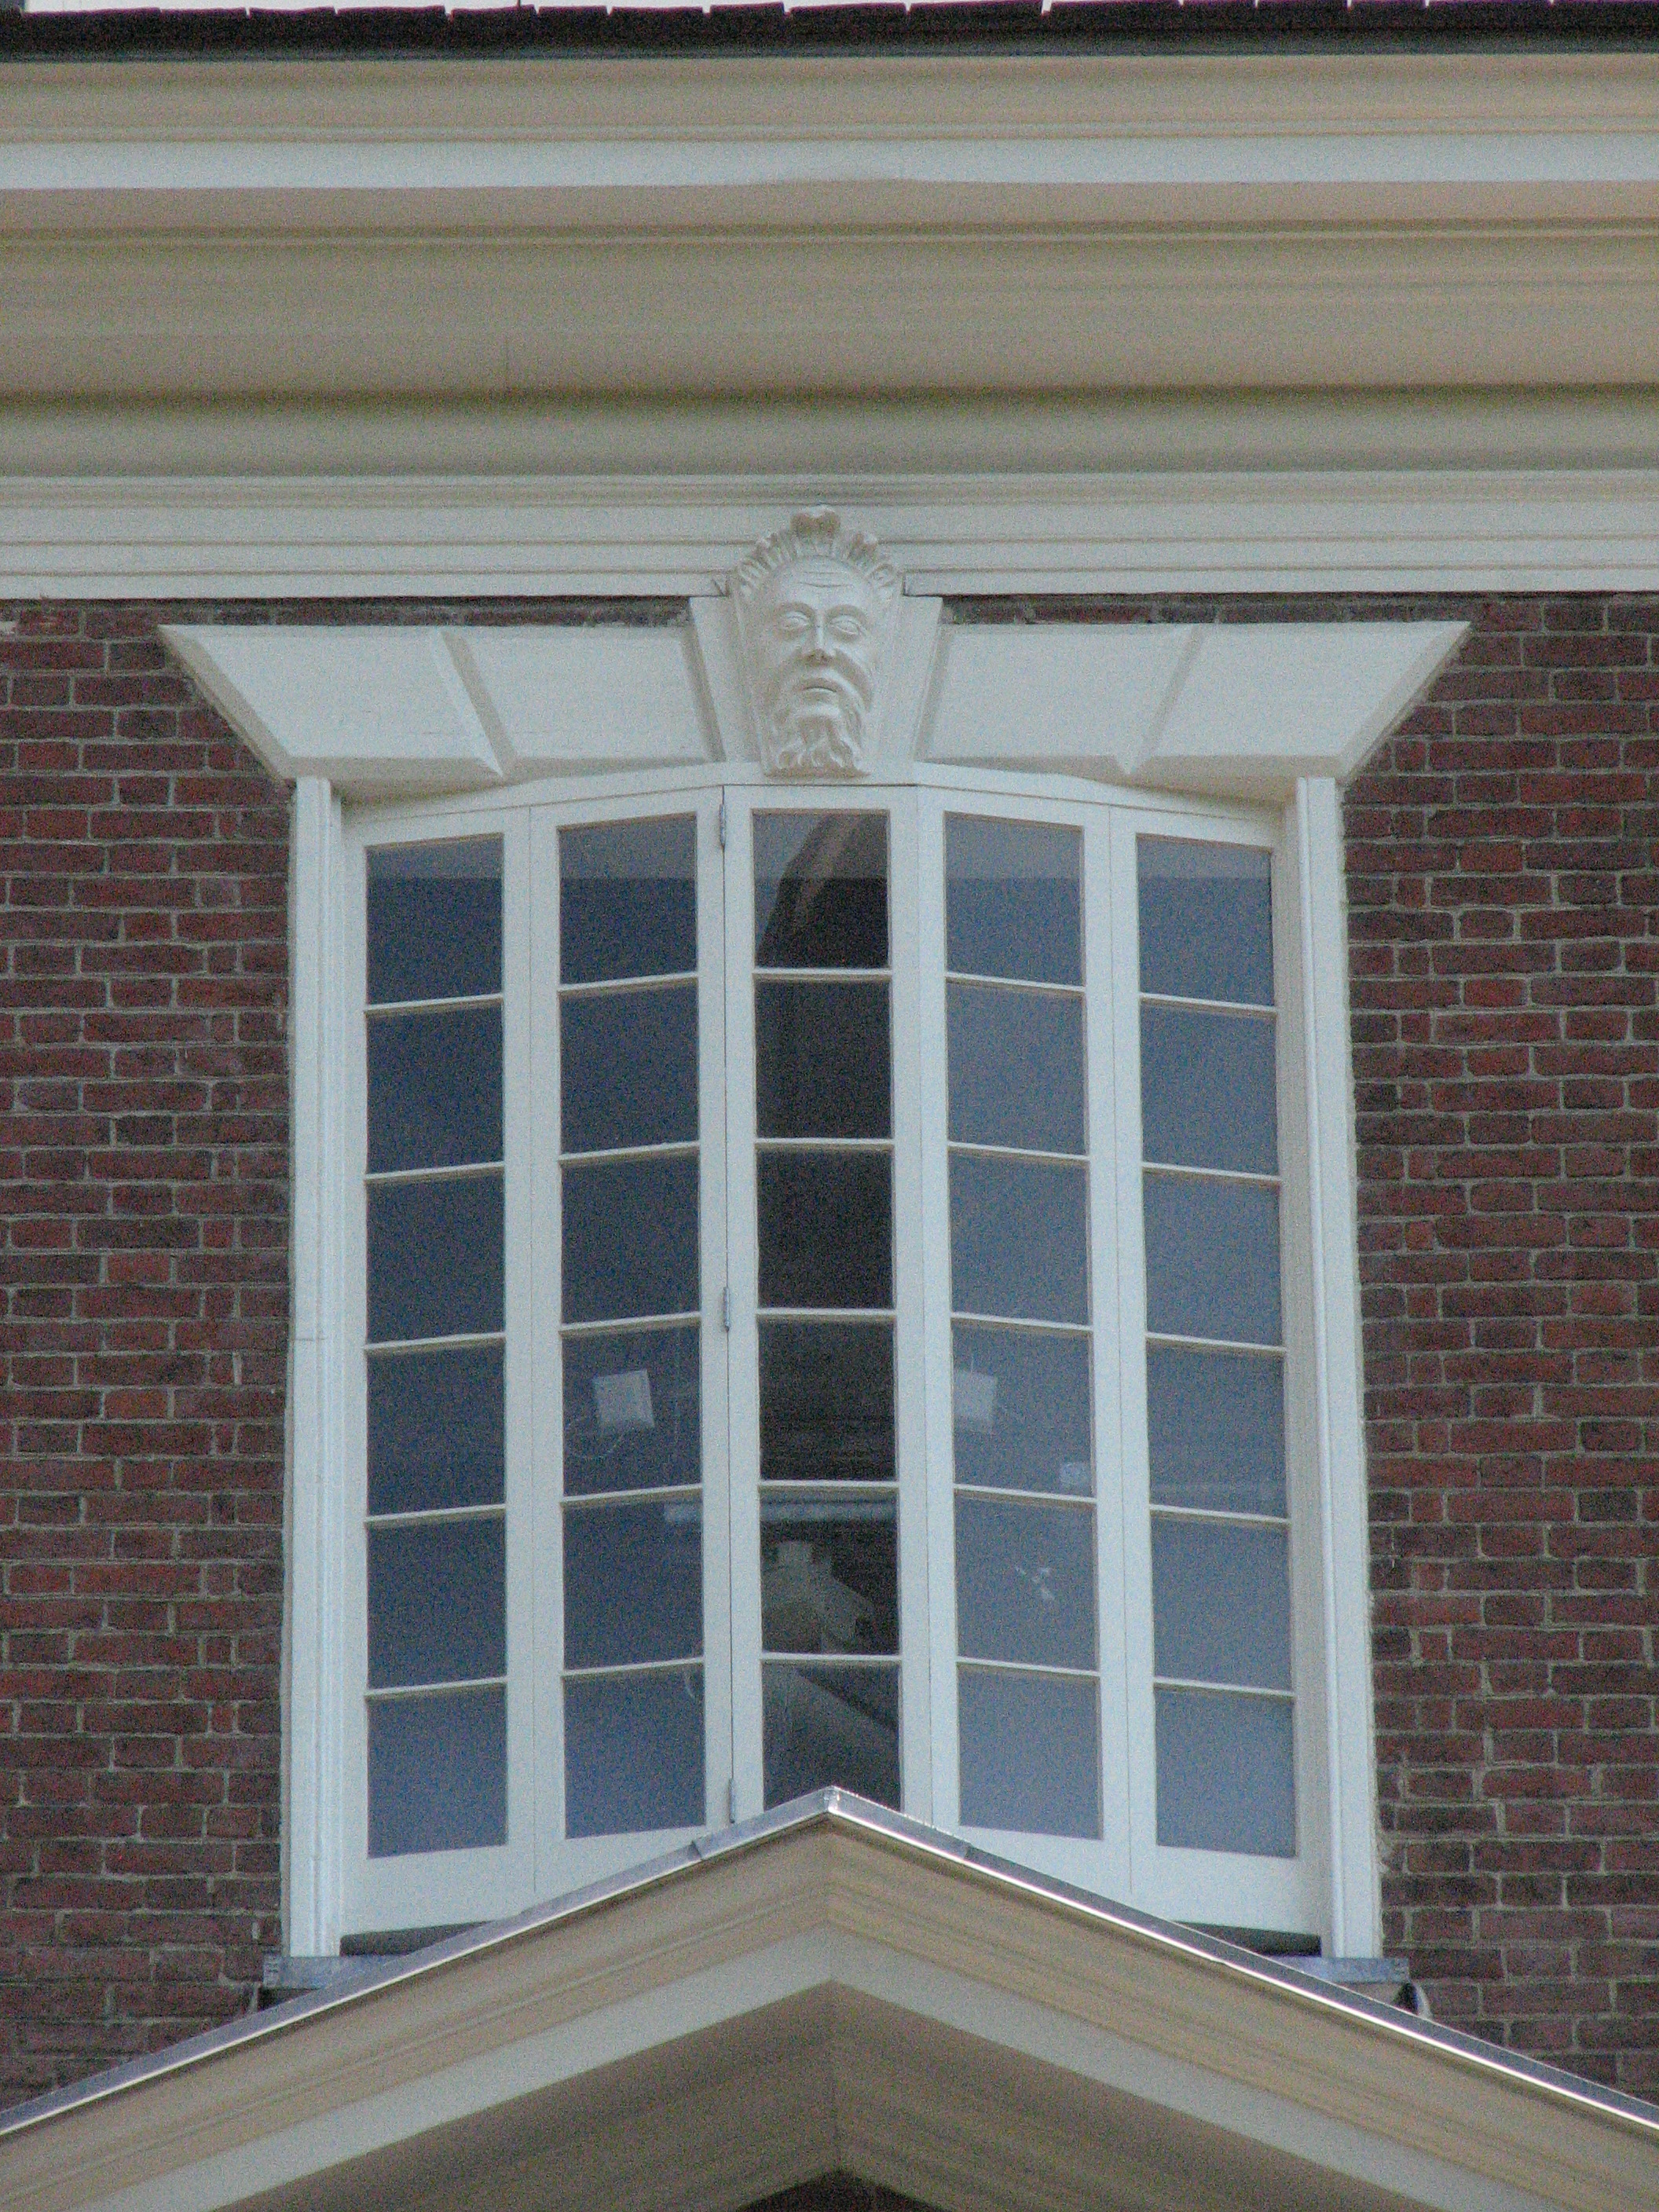 The window on the fourth story of the tower's south side.